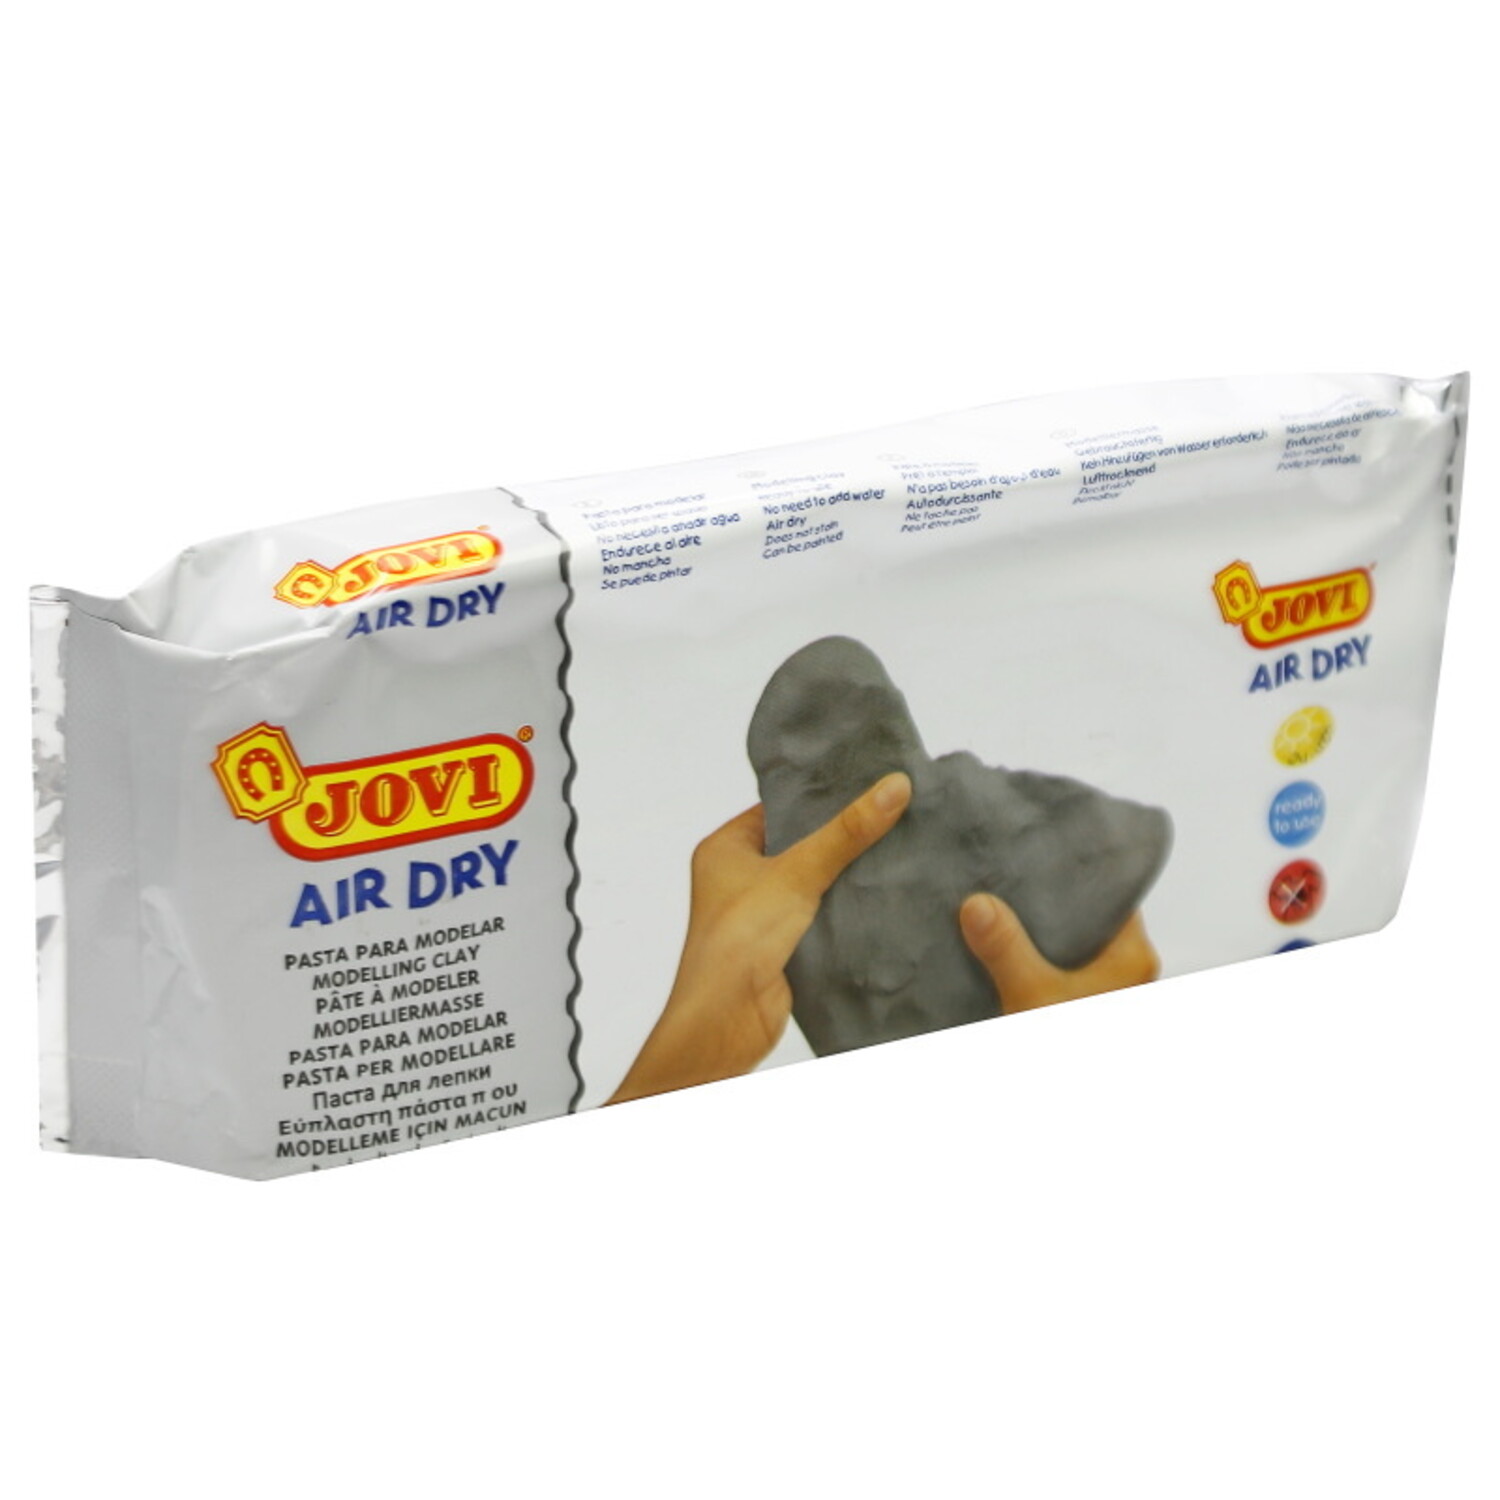 Air Hardening Clay